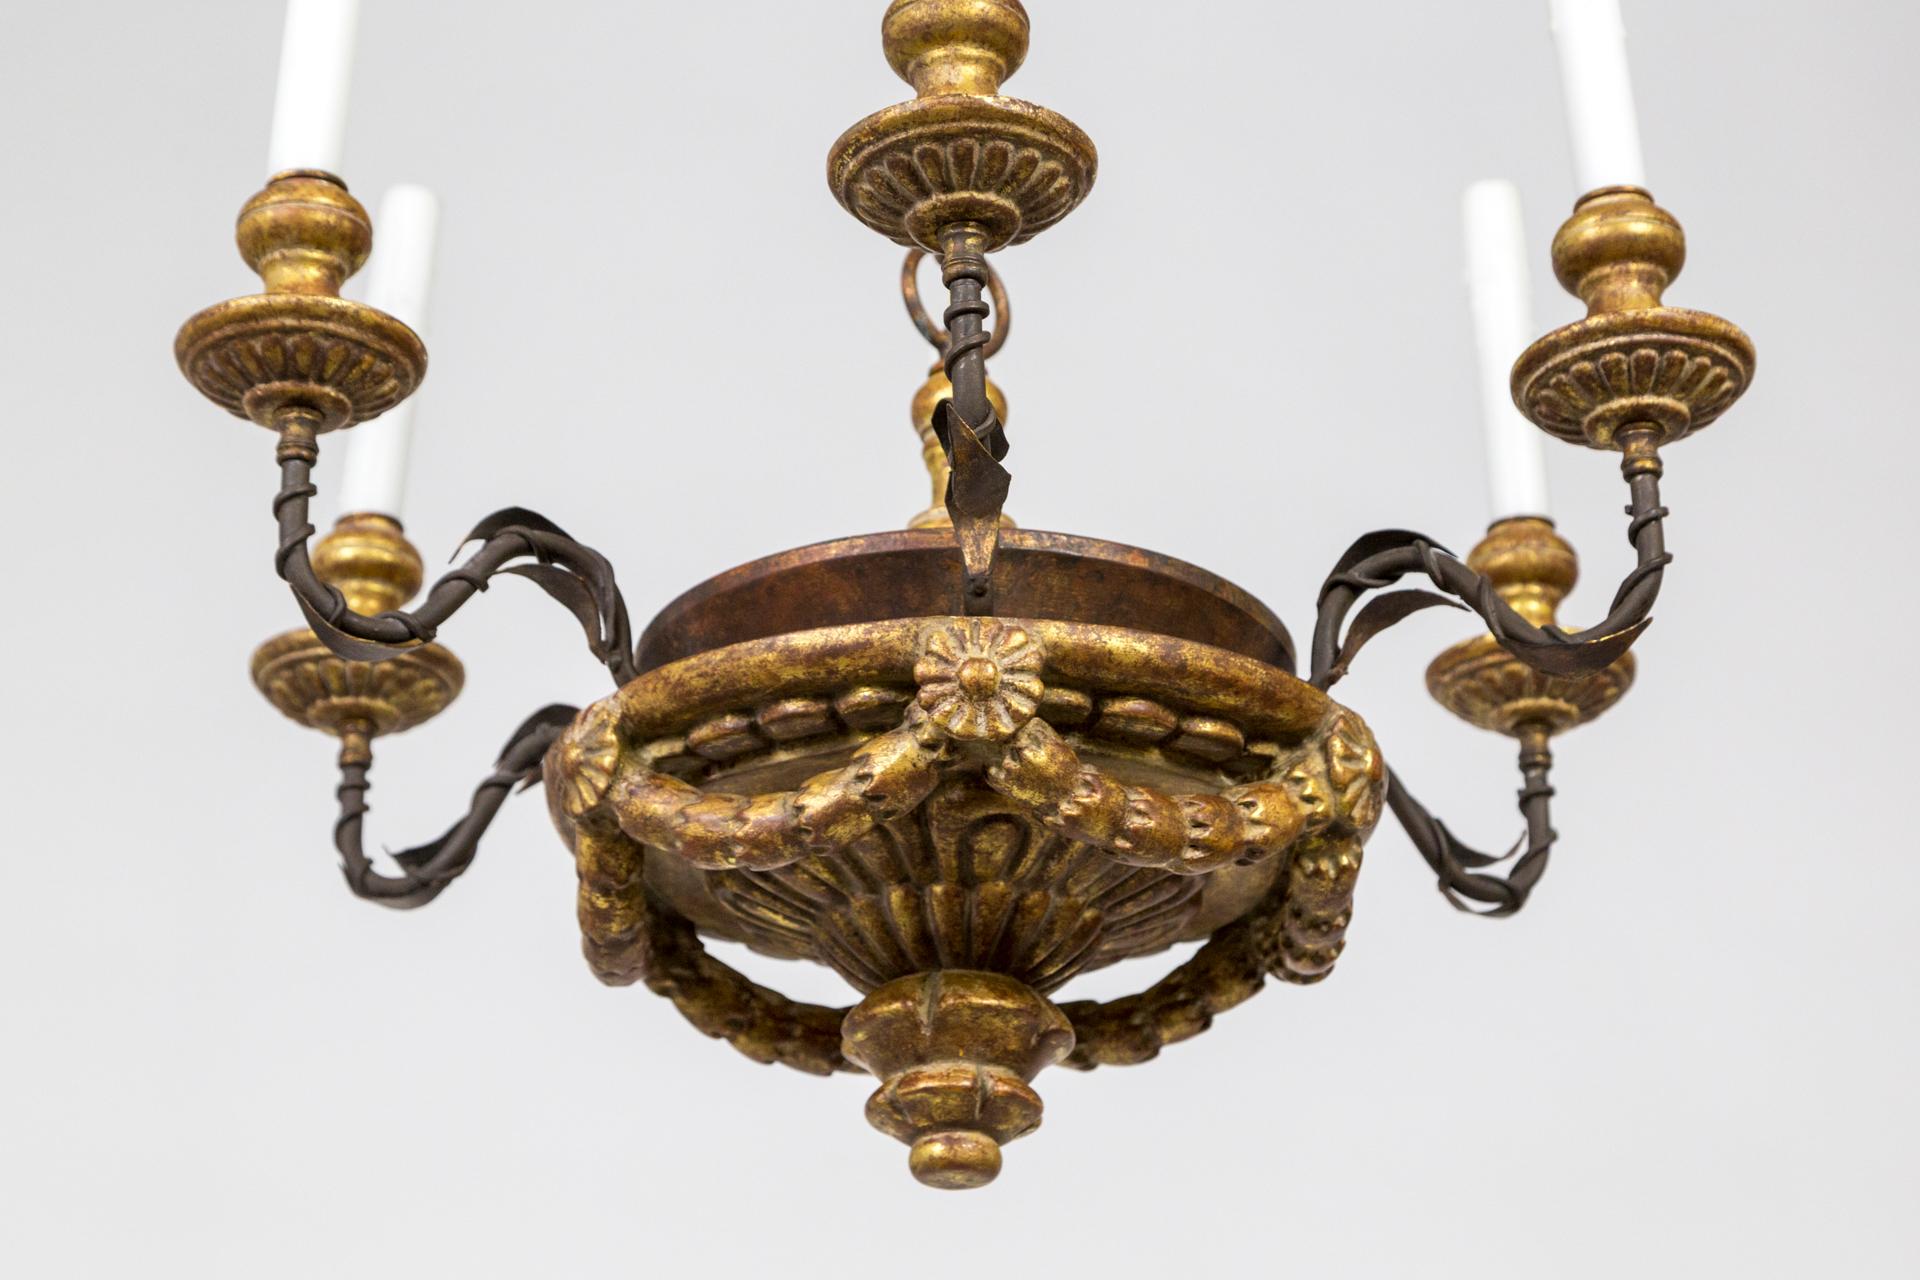 A neoclassical, 6-arm candlestick chandelier by Dennis & Leen.  It has a carved wood, bowl-shaped body, and S-curve black iron arms with vines spiraling around them.  It is gilt with 22k gold on the candle cups, rosette garlands, and finial.  With